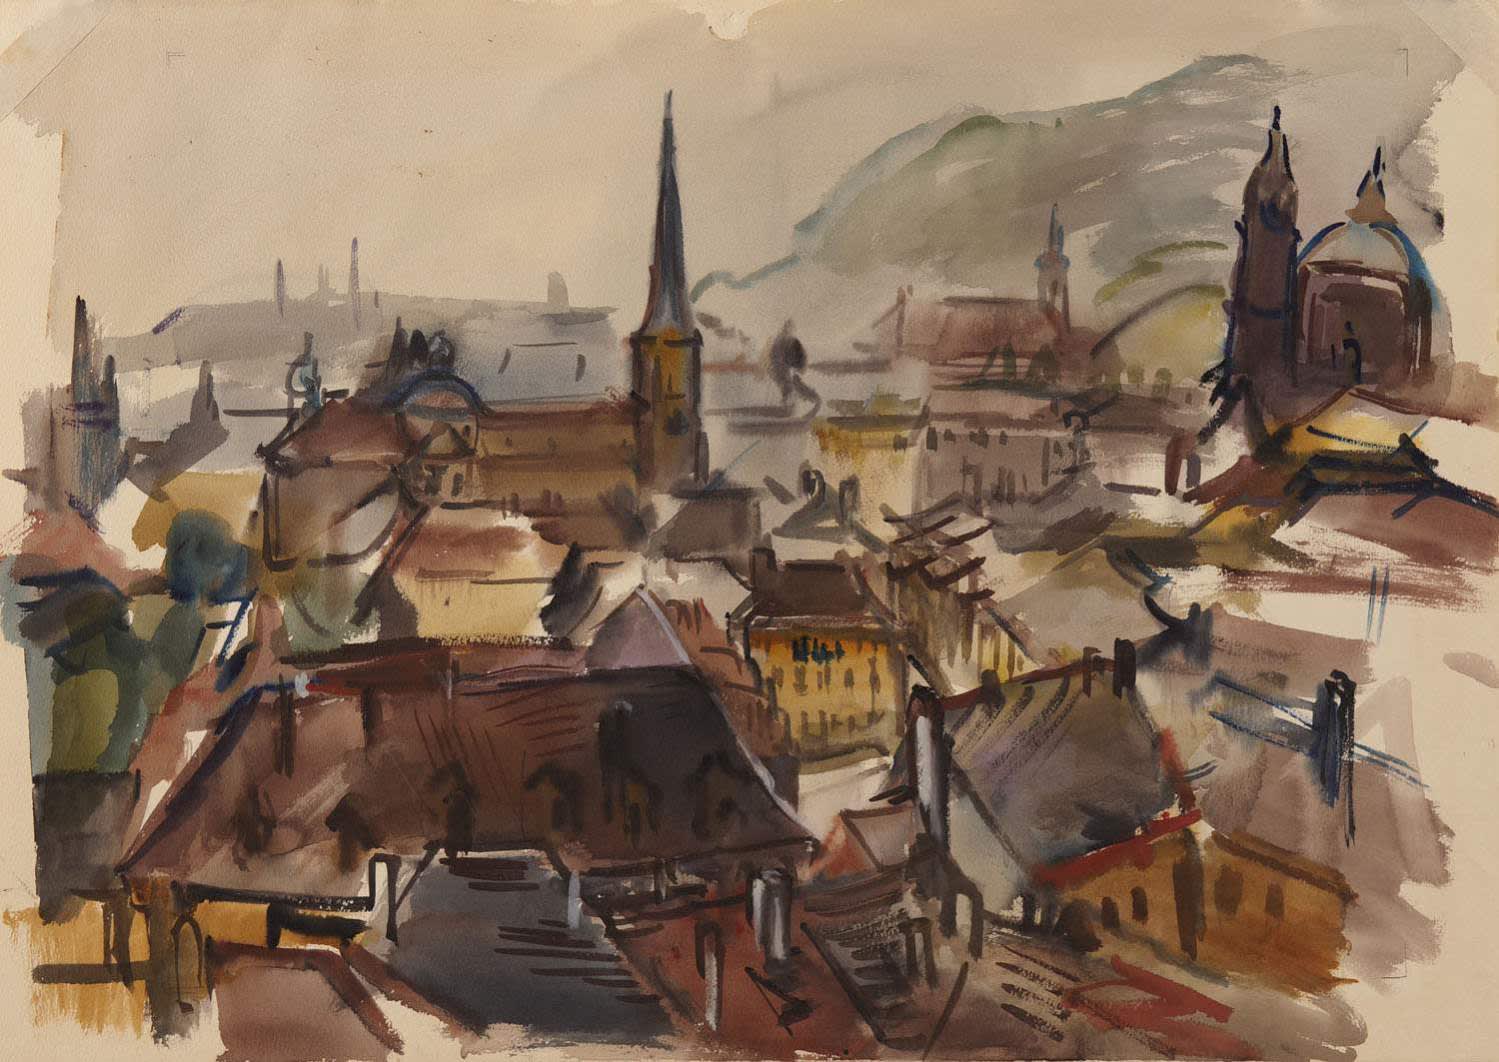 Freda Salvendy (1887-1965) Prague n.d. Watercolour on paper 35.5 x 45.4 cm Ben Uri Collection © Freda Salvendy estate To see and discover more about this artist click here